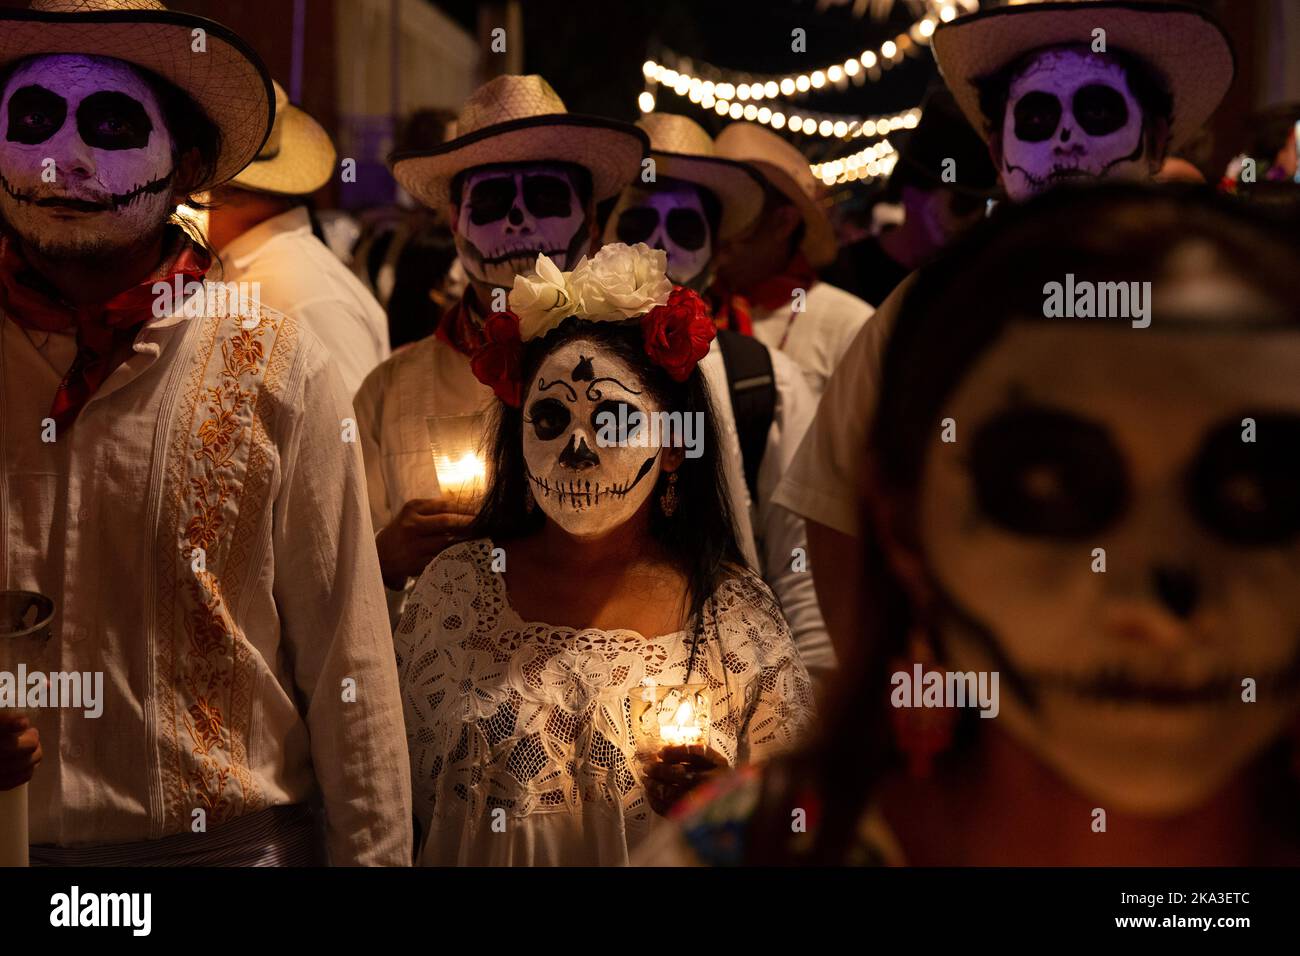 The Paseo de las Ánimas (“Walk of the souls”), a parade that goes from the General Cemetery to Parque de San Juan during Hanal Pixán in Mérida, Yucatán, Mexico on October 28, 2022. Hanal Pixán, which means “food for the souls,” is an ancient Mayan tradition carried out to remember friends and relatives who have passed away. It occurs every year, from October 31 to November 2, when the souls are permitted to return and visit their relatives. Hanal Pixán coincides with the better known Mexican tradition of Día de Muertos or Day of the Dead. It combines elements of Mayan culture and Catholicism. Stock Photo